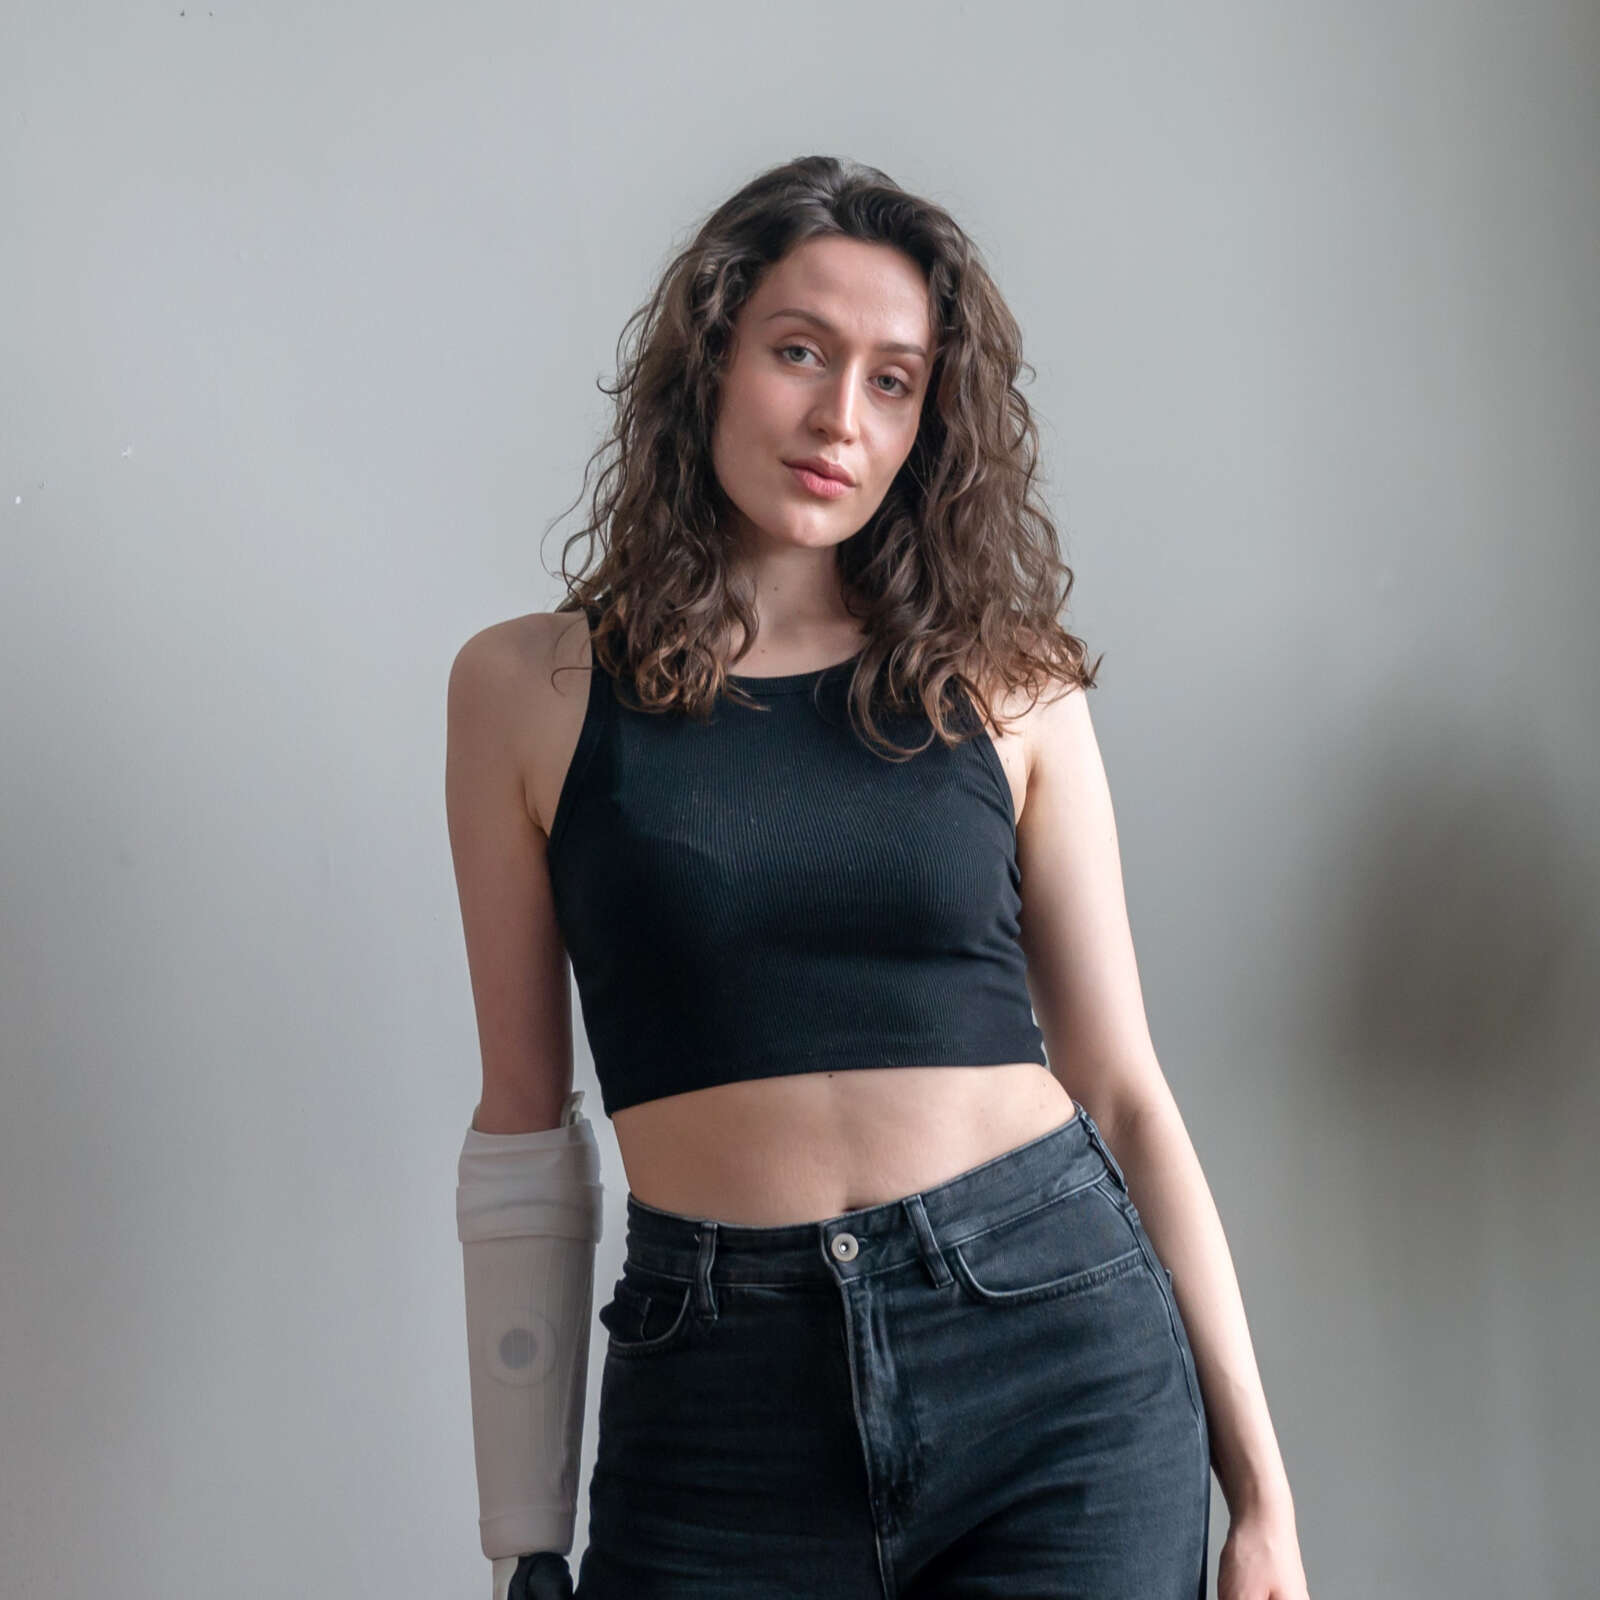 Lara is a curly-haired brunette female wearing all black. She has a white prosthetic arm and is standing against a grey backdrop.